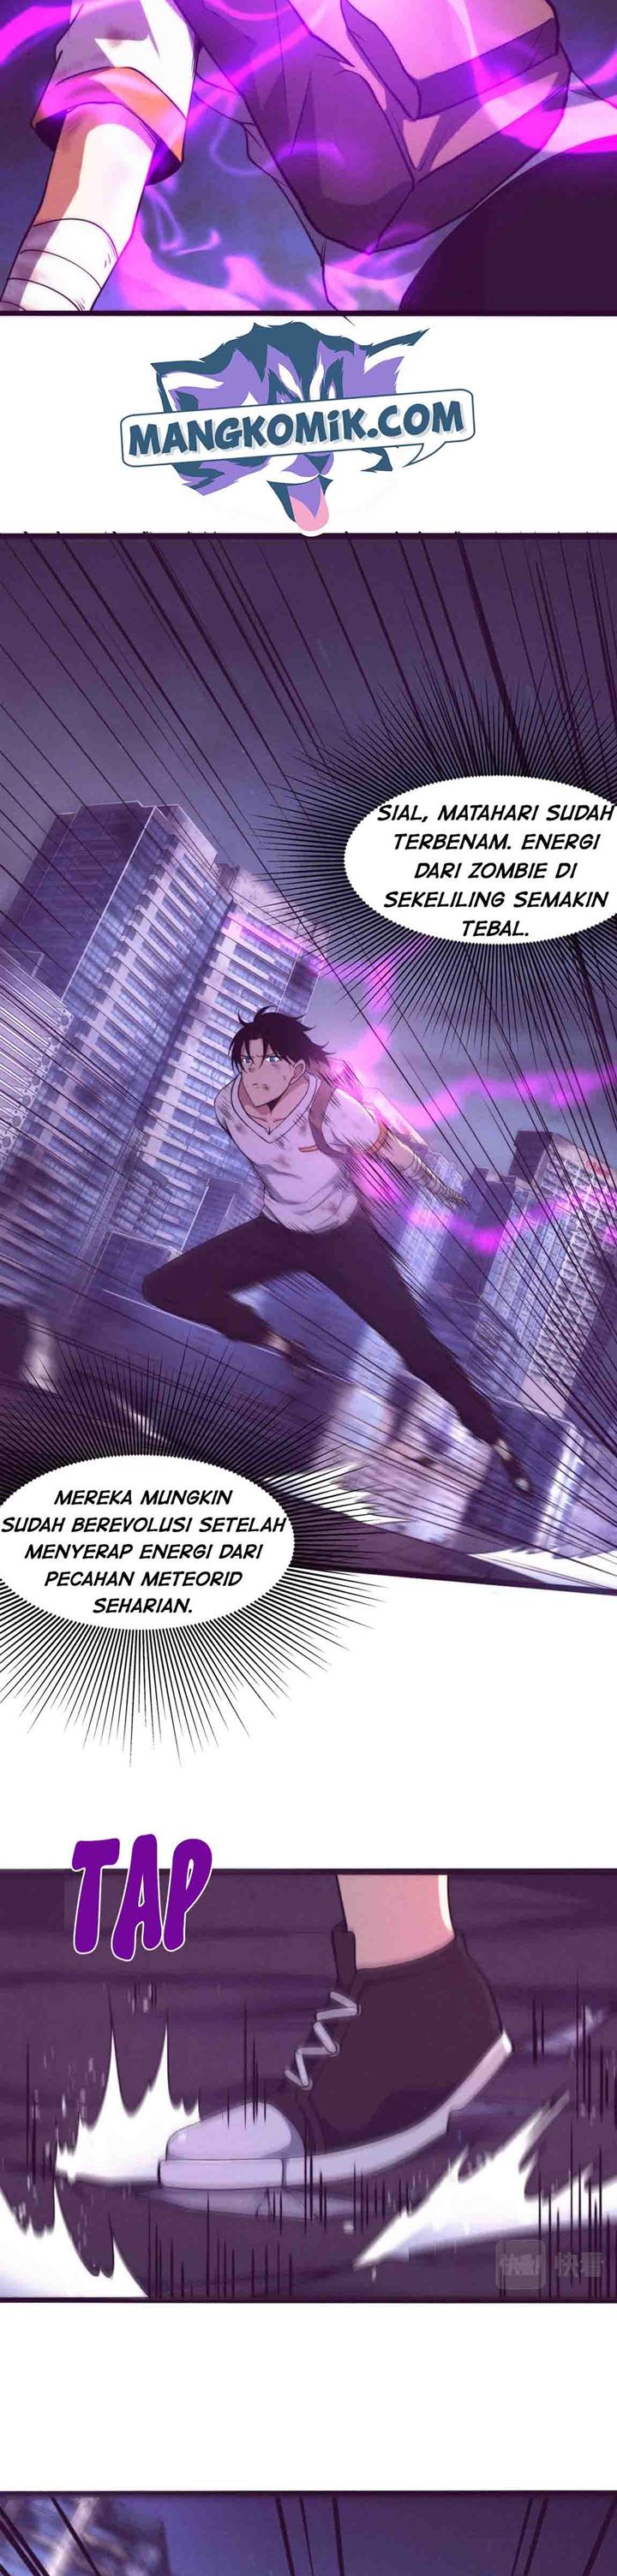 Evolution frenzy Chapter 11 bahasa indoensia